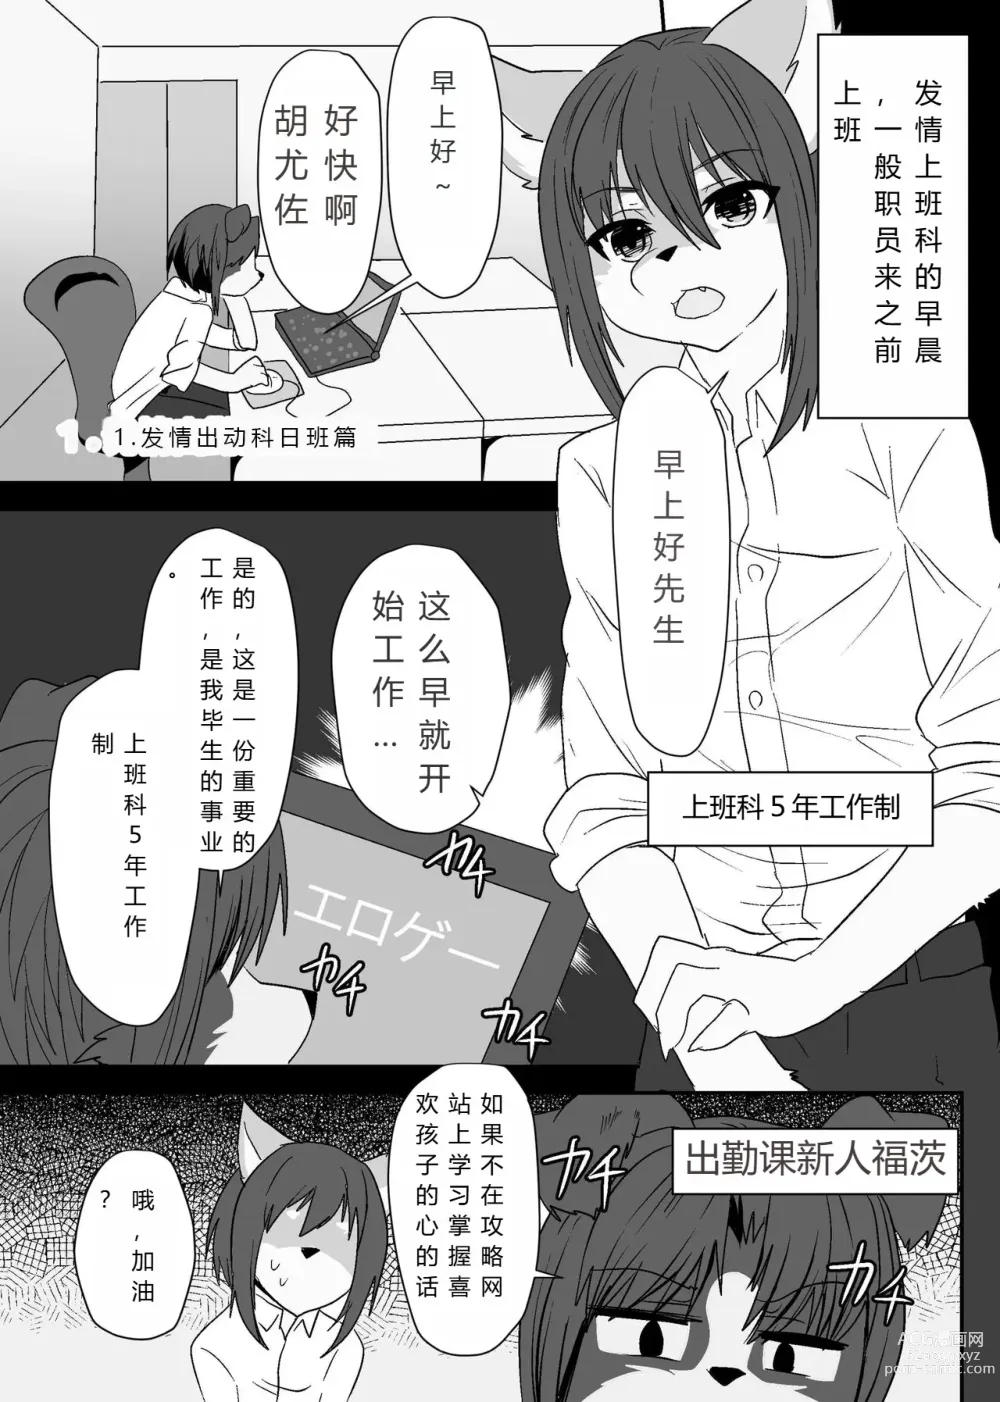 Page 3 of doujinshi 我们要上班吗？